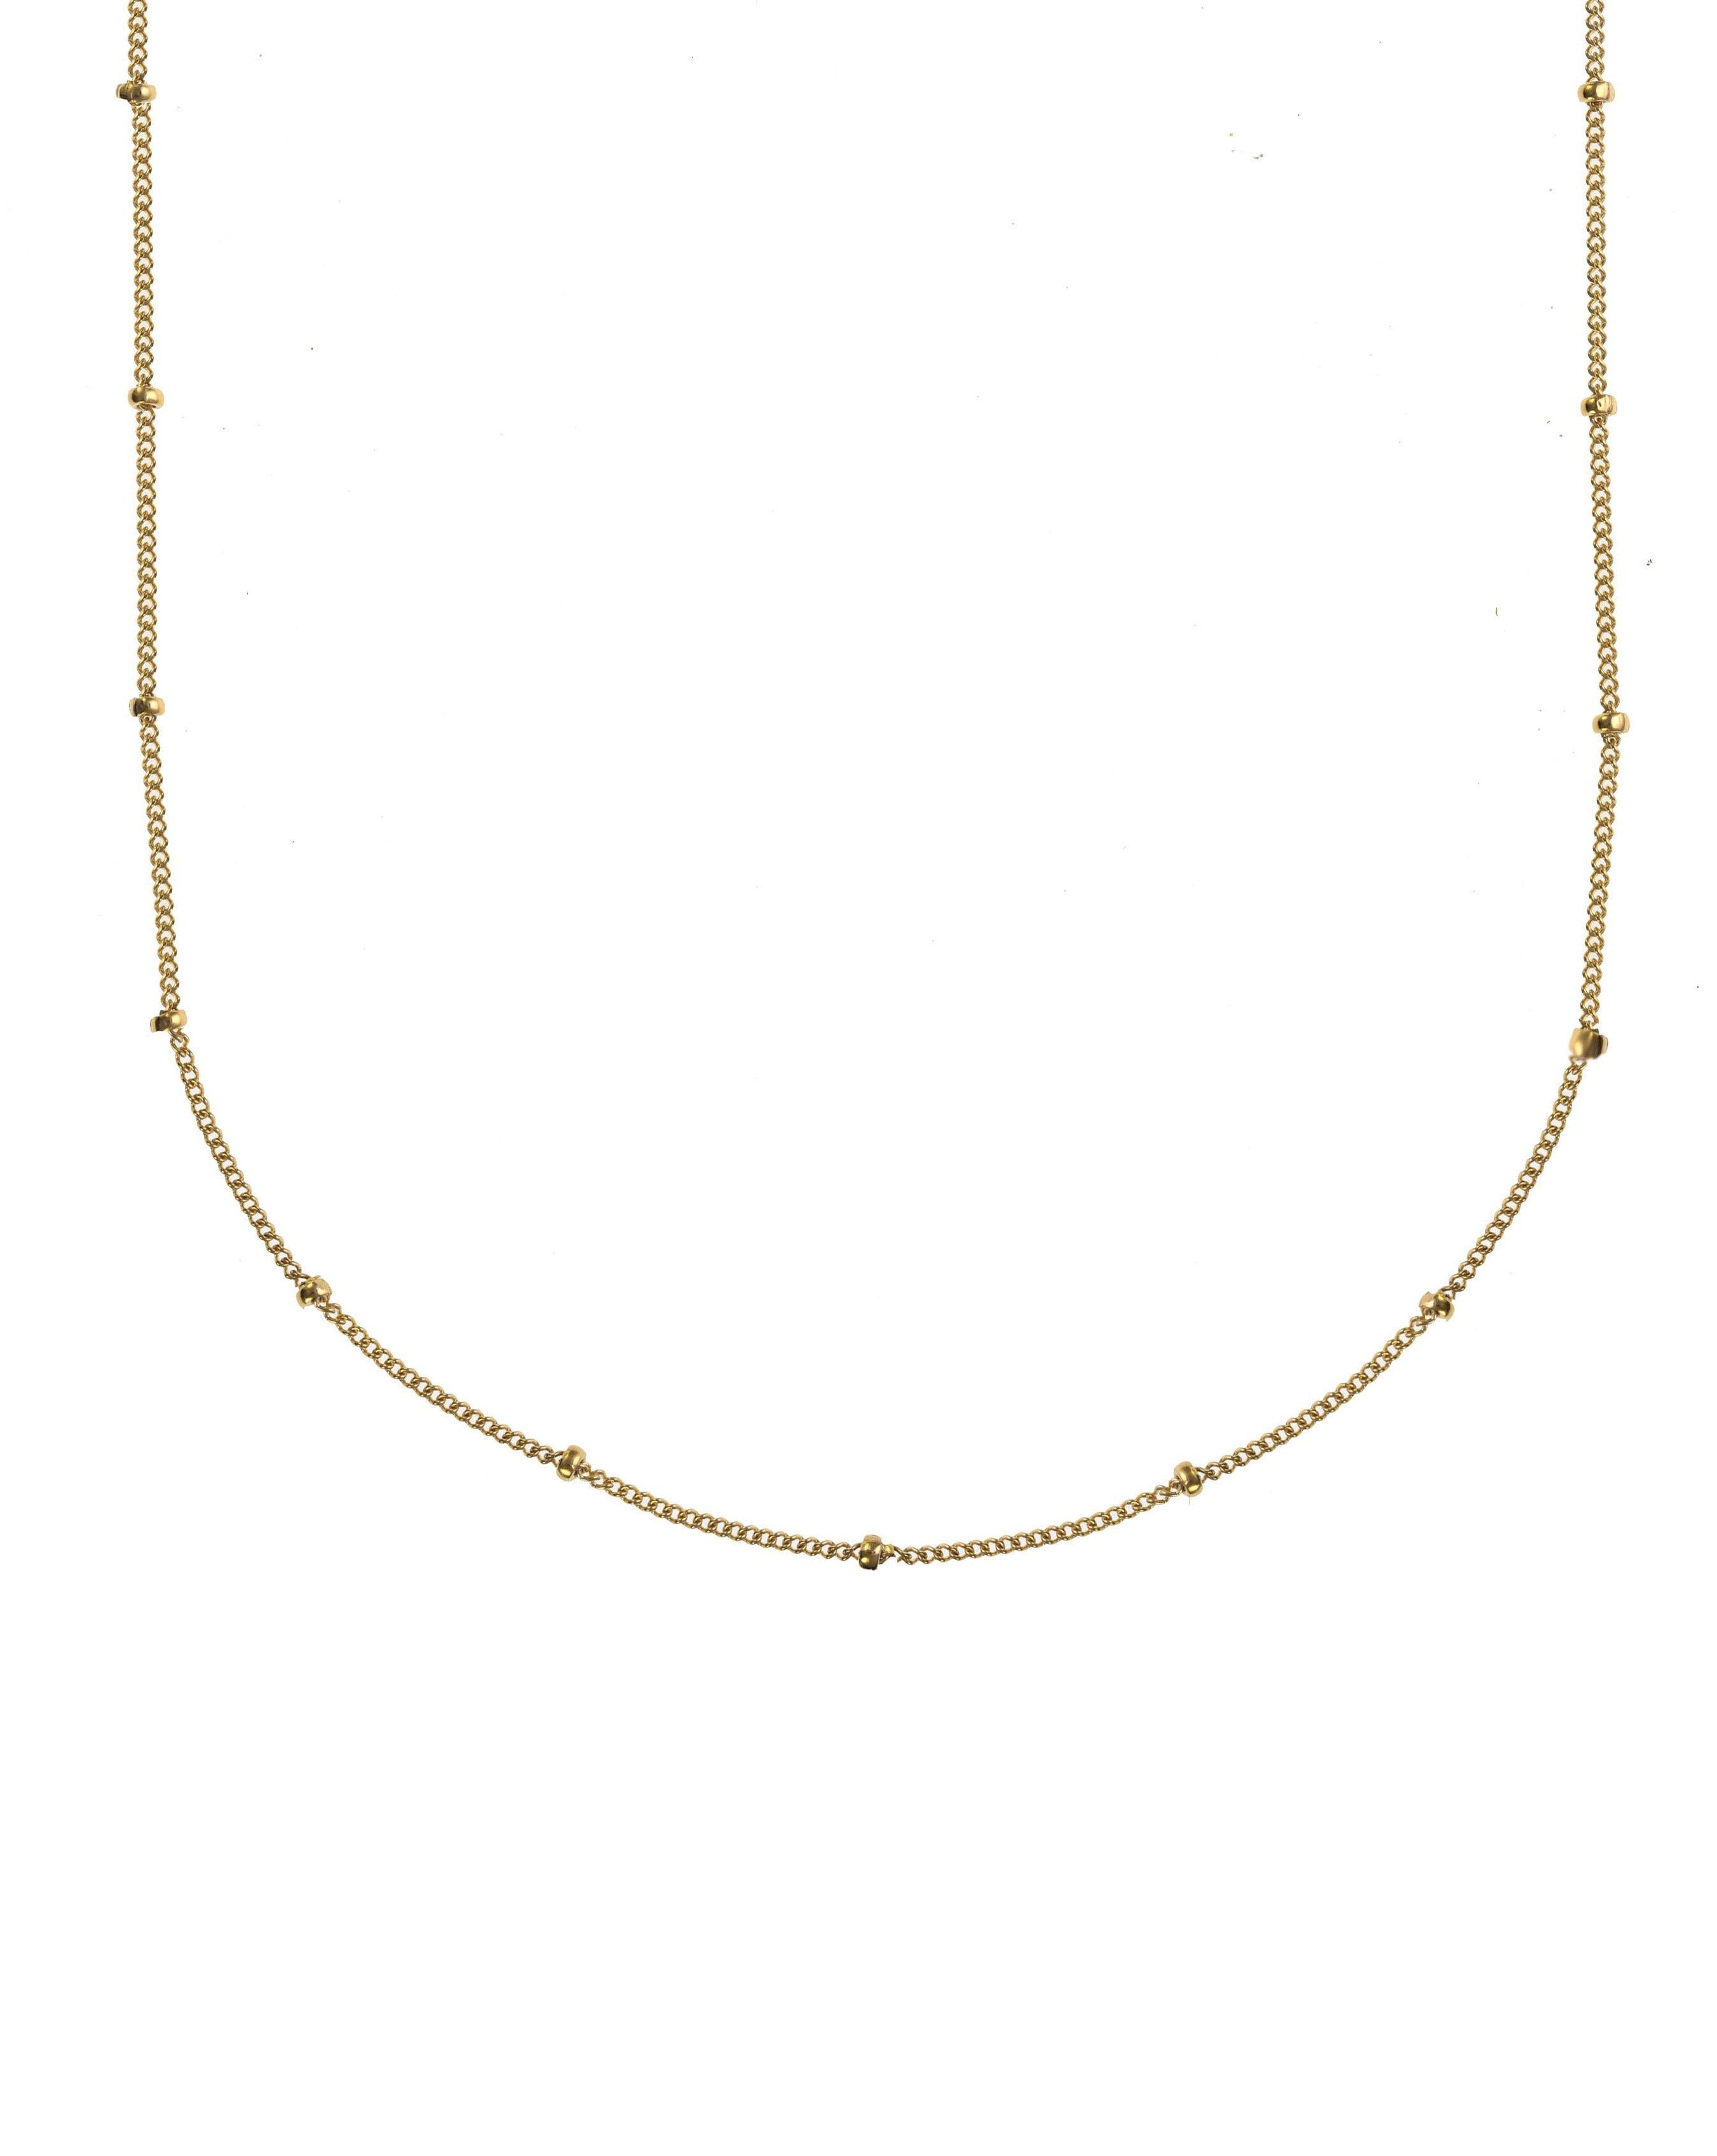 Dots Choker by KOZAKH. A 12 to 14 inch adjustable length necklace in 14K Gold Filled, featuring a 1mm curb chain with balls design.